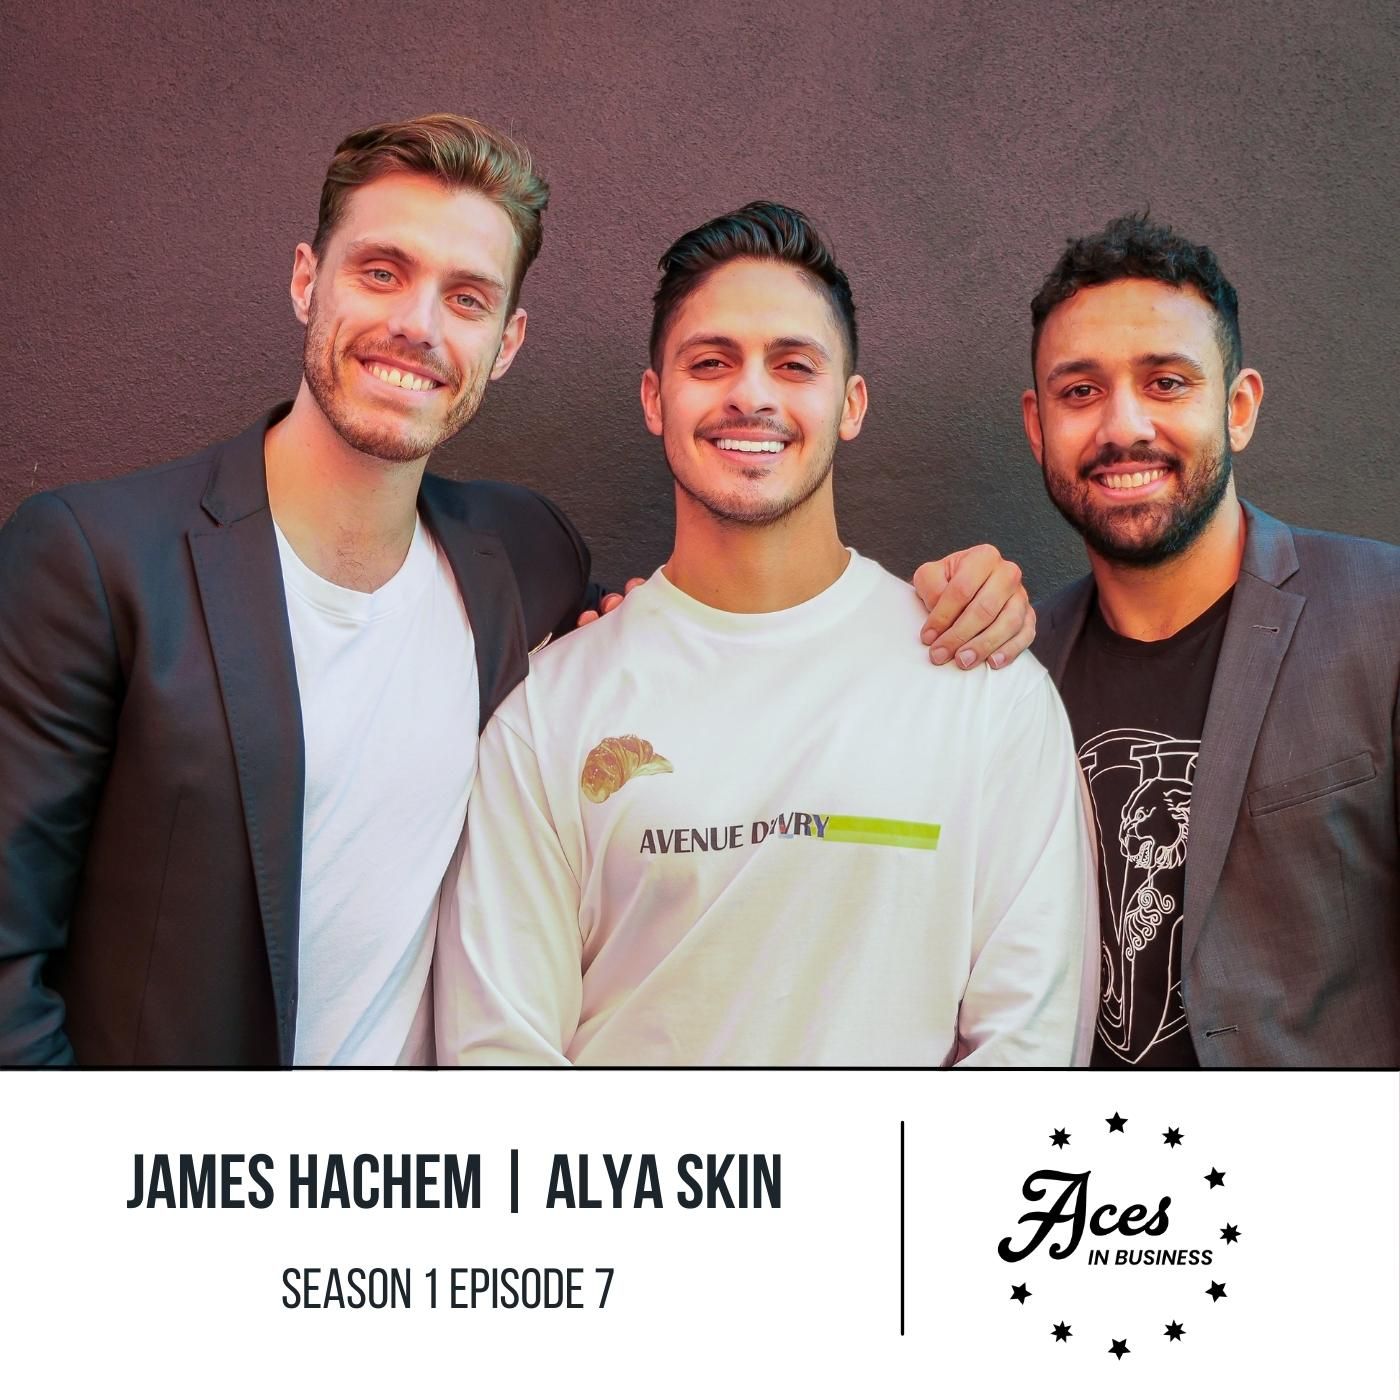 Aces in Business with Alya Skin Co Founder, James Hachem